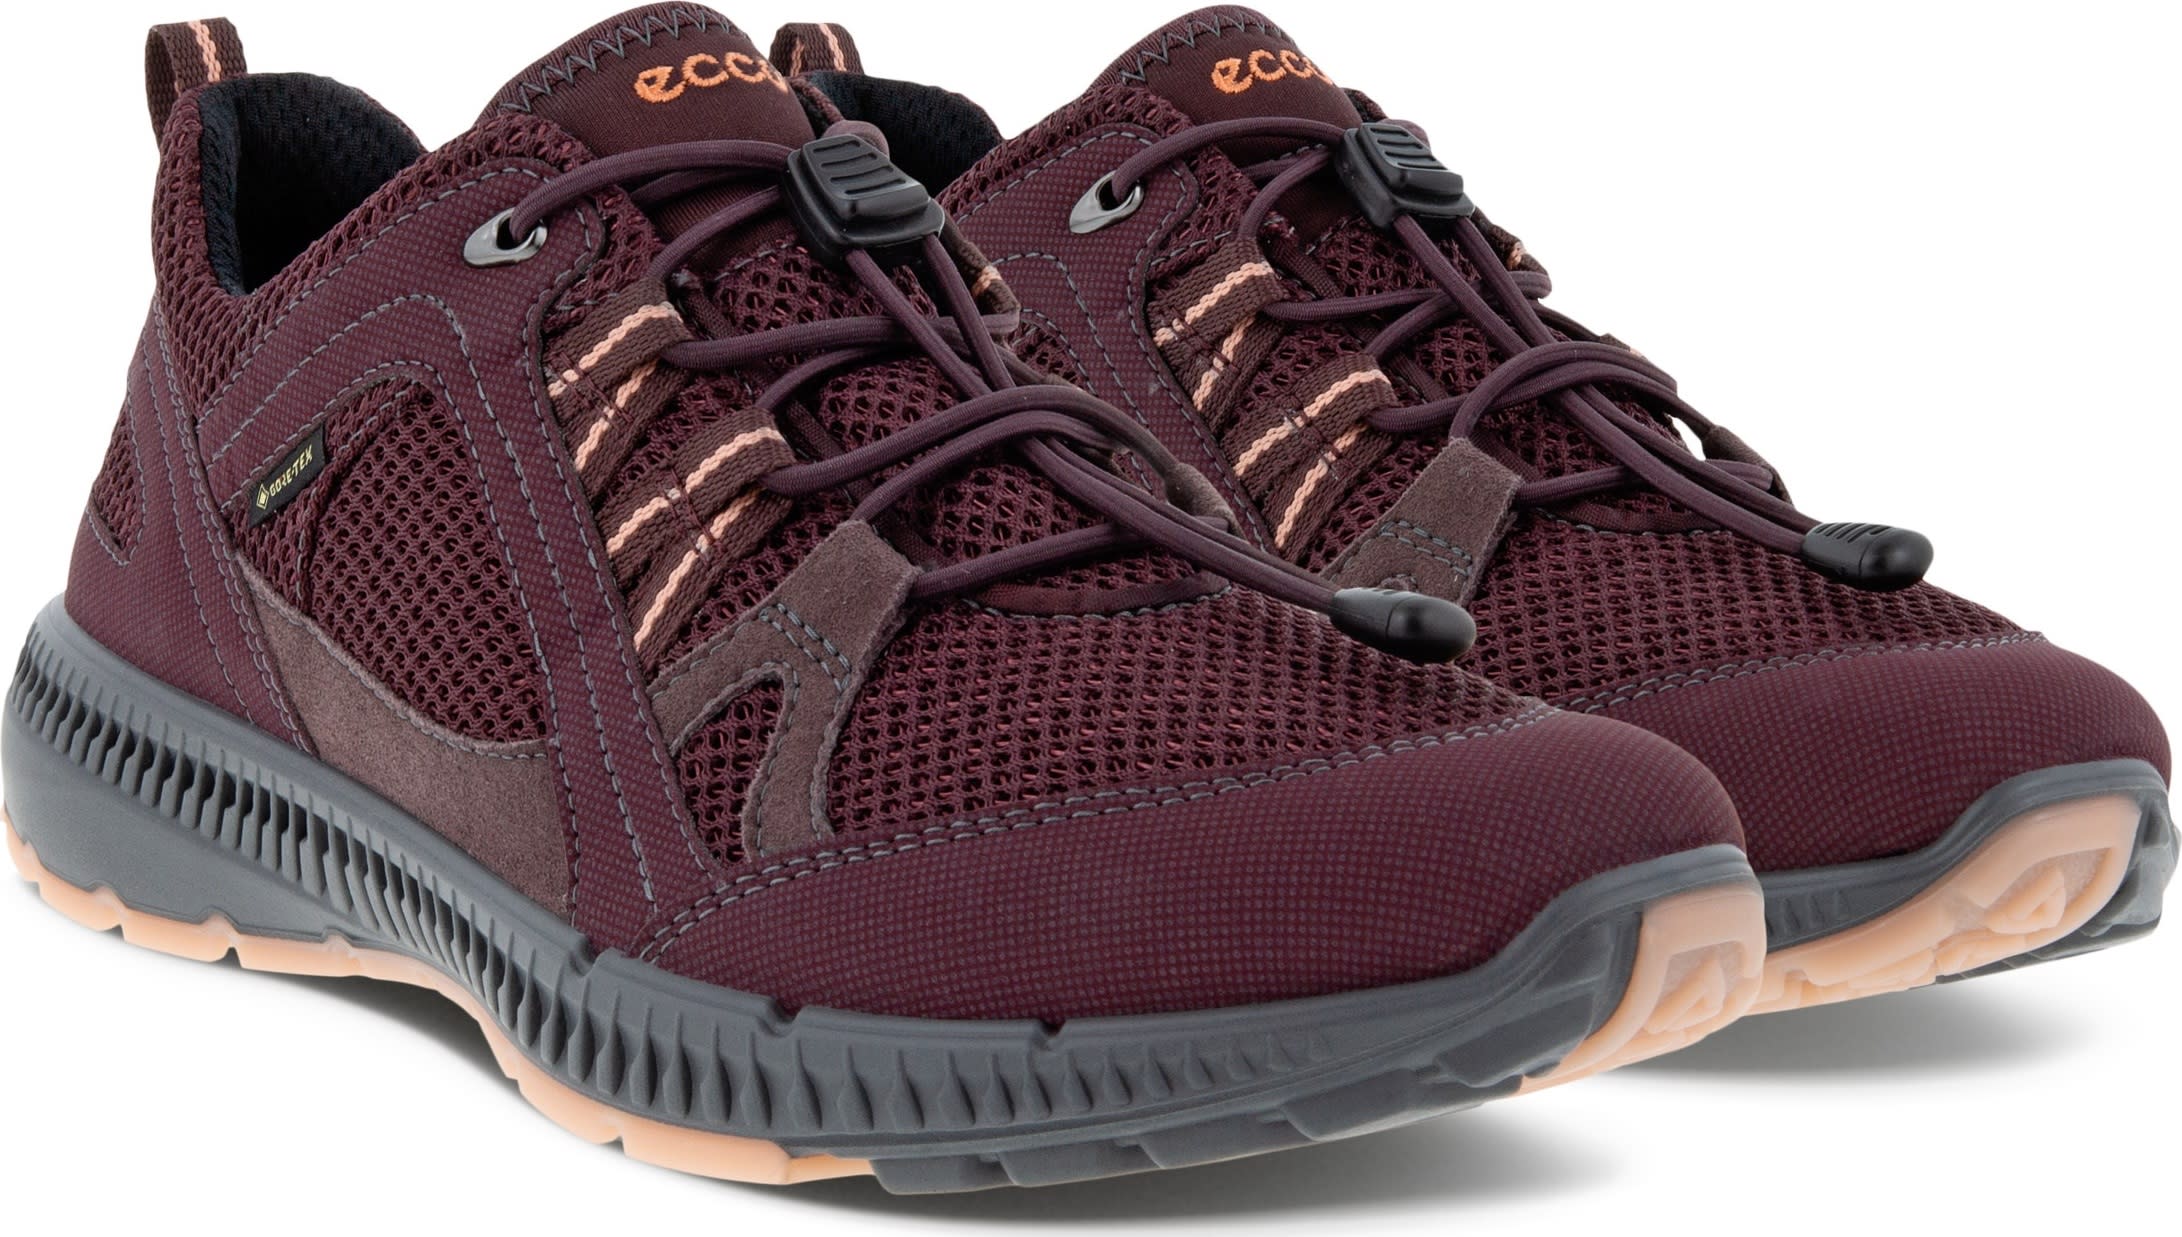 Buy Ecco Women's II Gtx Tex from Outnorth